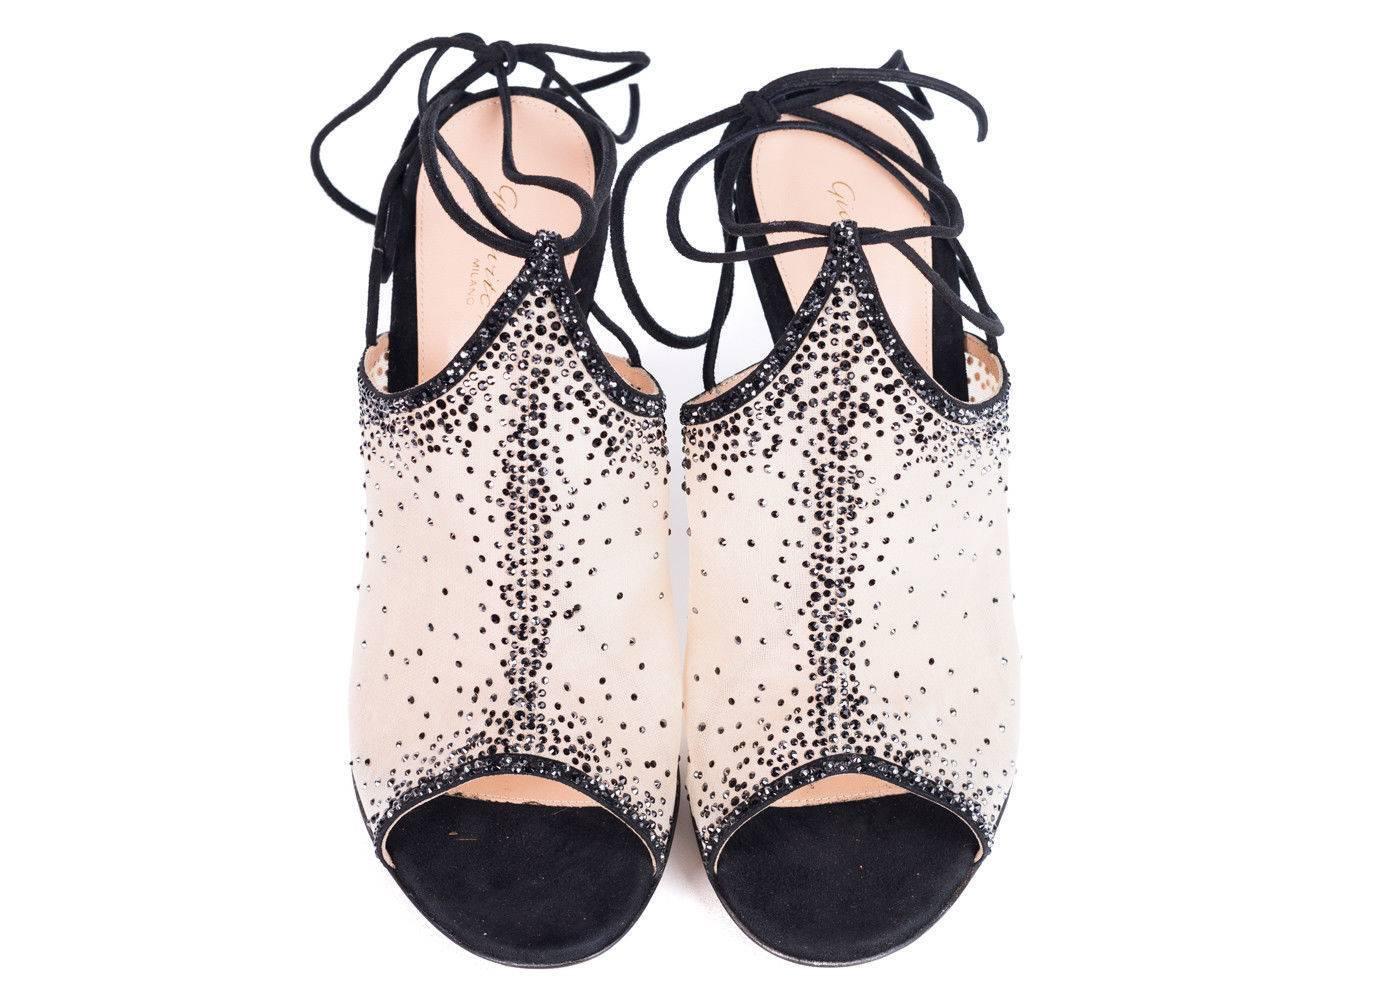 Brand New Gianvito Rossi Etoile Crystal Embellished Ankle-Wrap Mules
Retails In-Store & Online for $1995
New Without Box
Size IT 37 / US 7

Lace up your Etoile Crystal Embellished Ankle-Wrap Mules and embrace the night. These embellished open toe